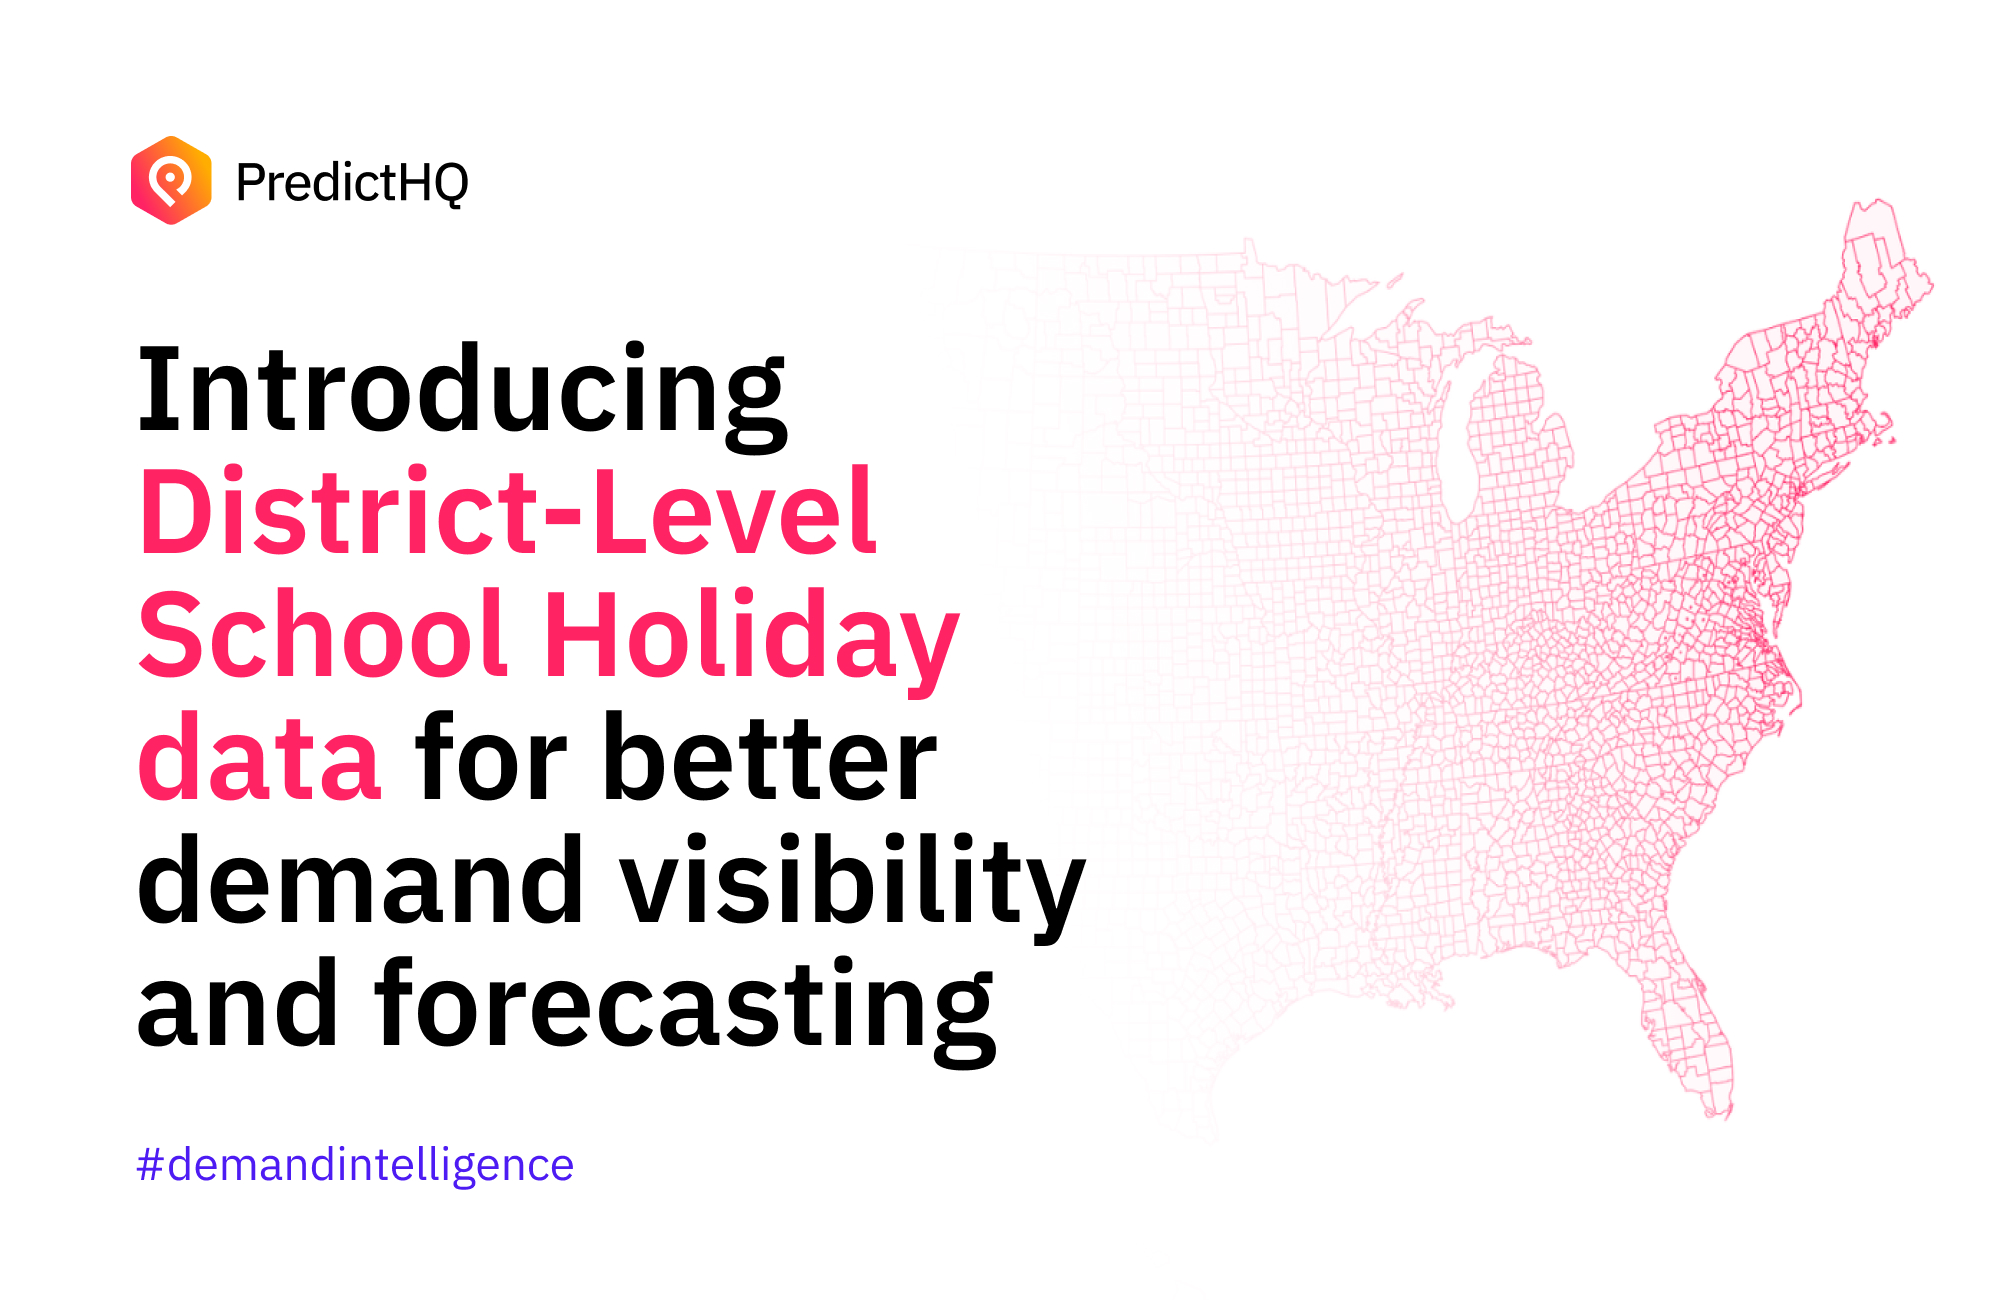 New Feature Introducing District-Level School Holiday data